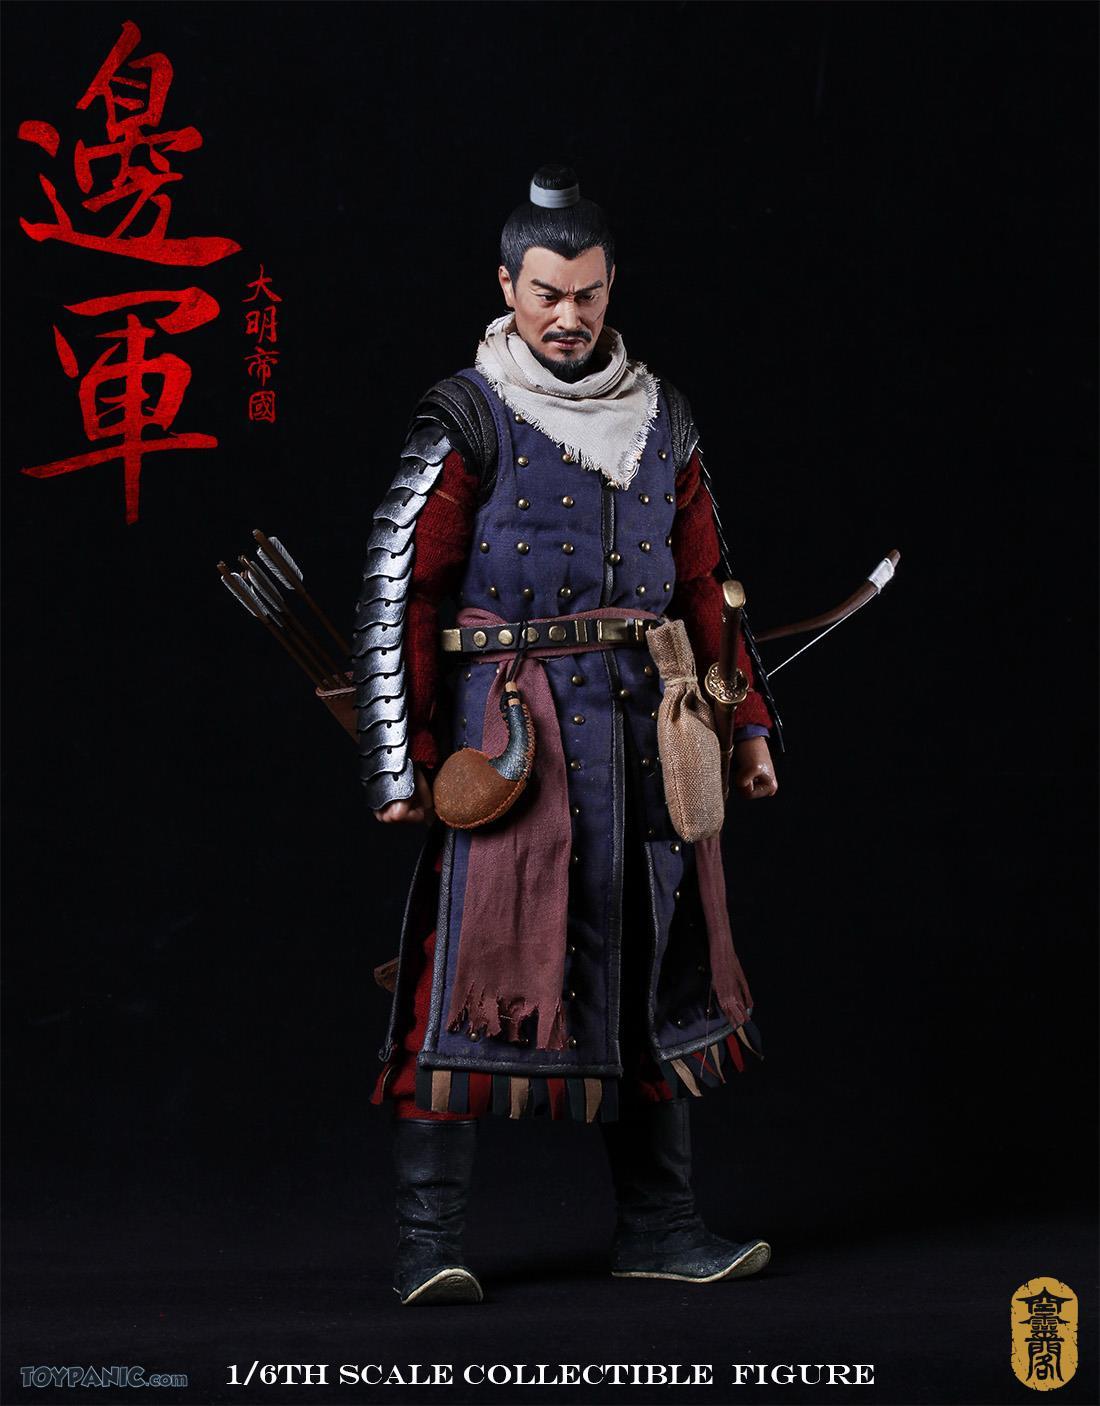 chinese - NEW PRODUCT: Sonder: 1/6 Song Dynasty Series-Yue Jiaxing Yang Zaixing Action Figure (SD005#) 1223201650535PM_35